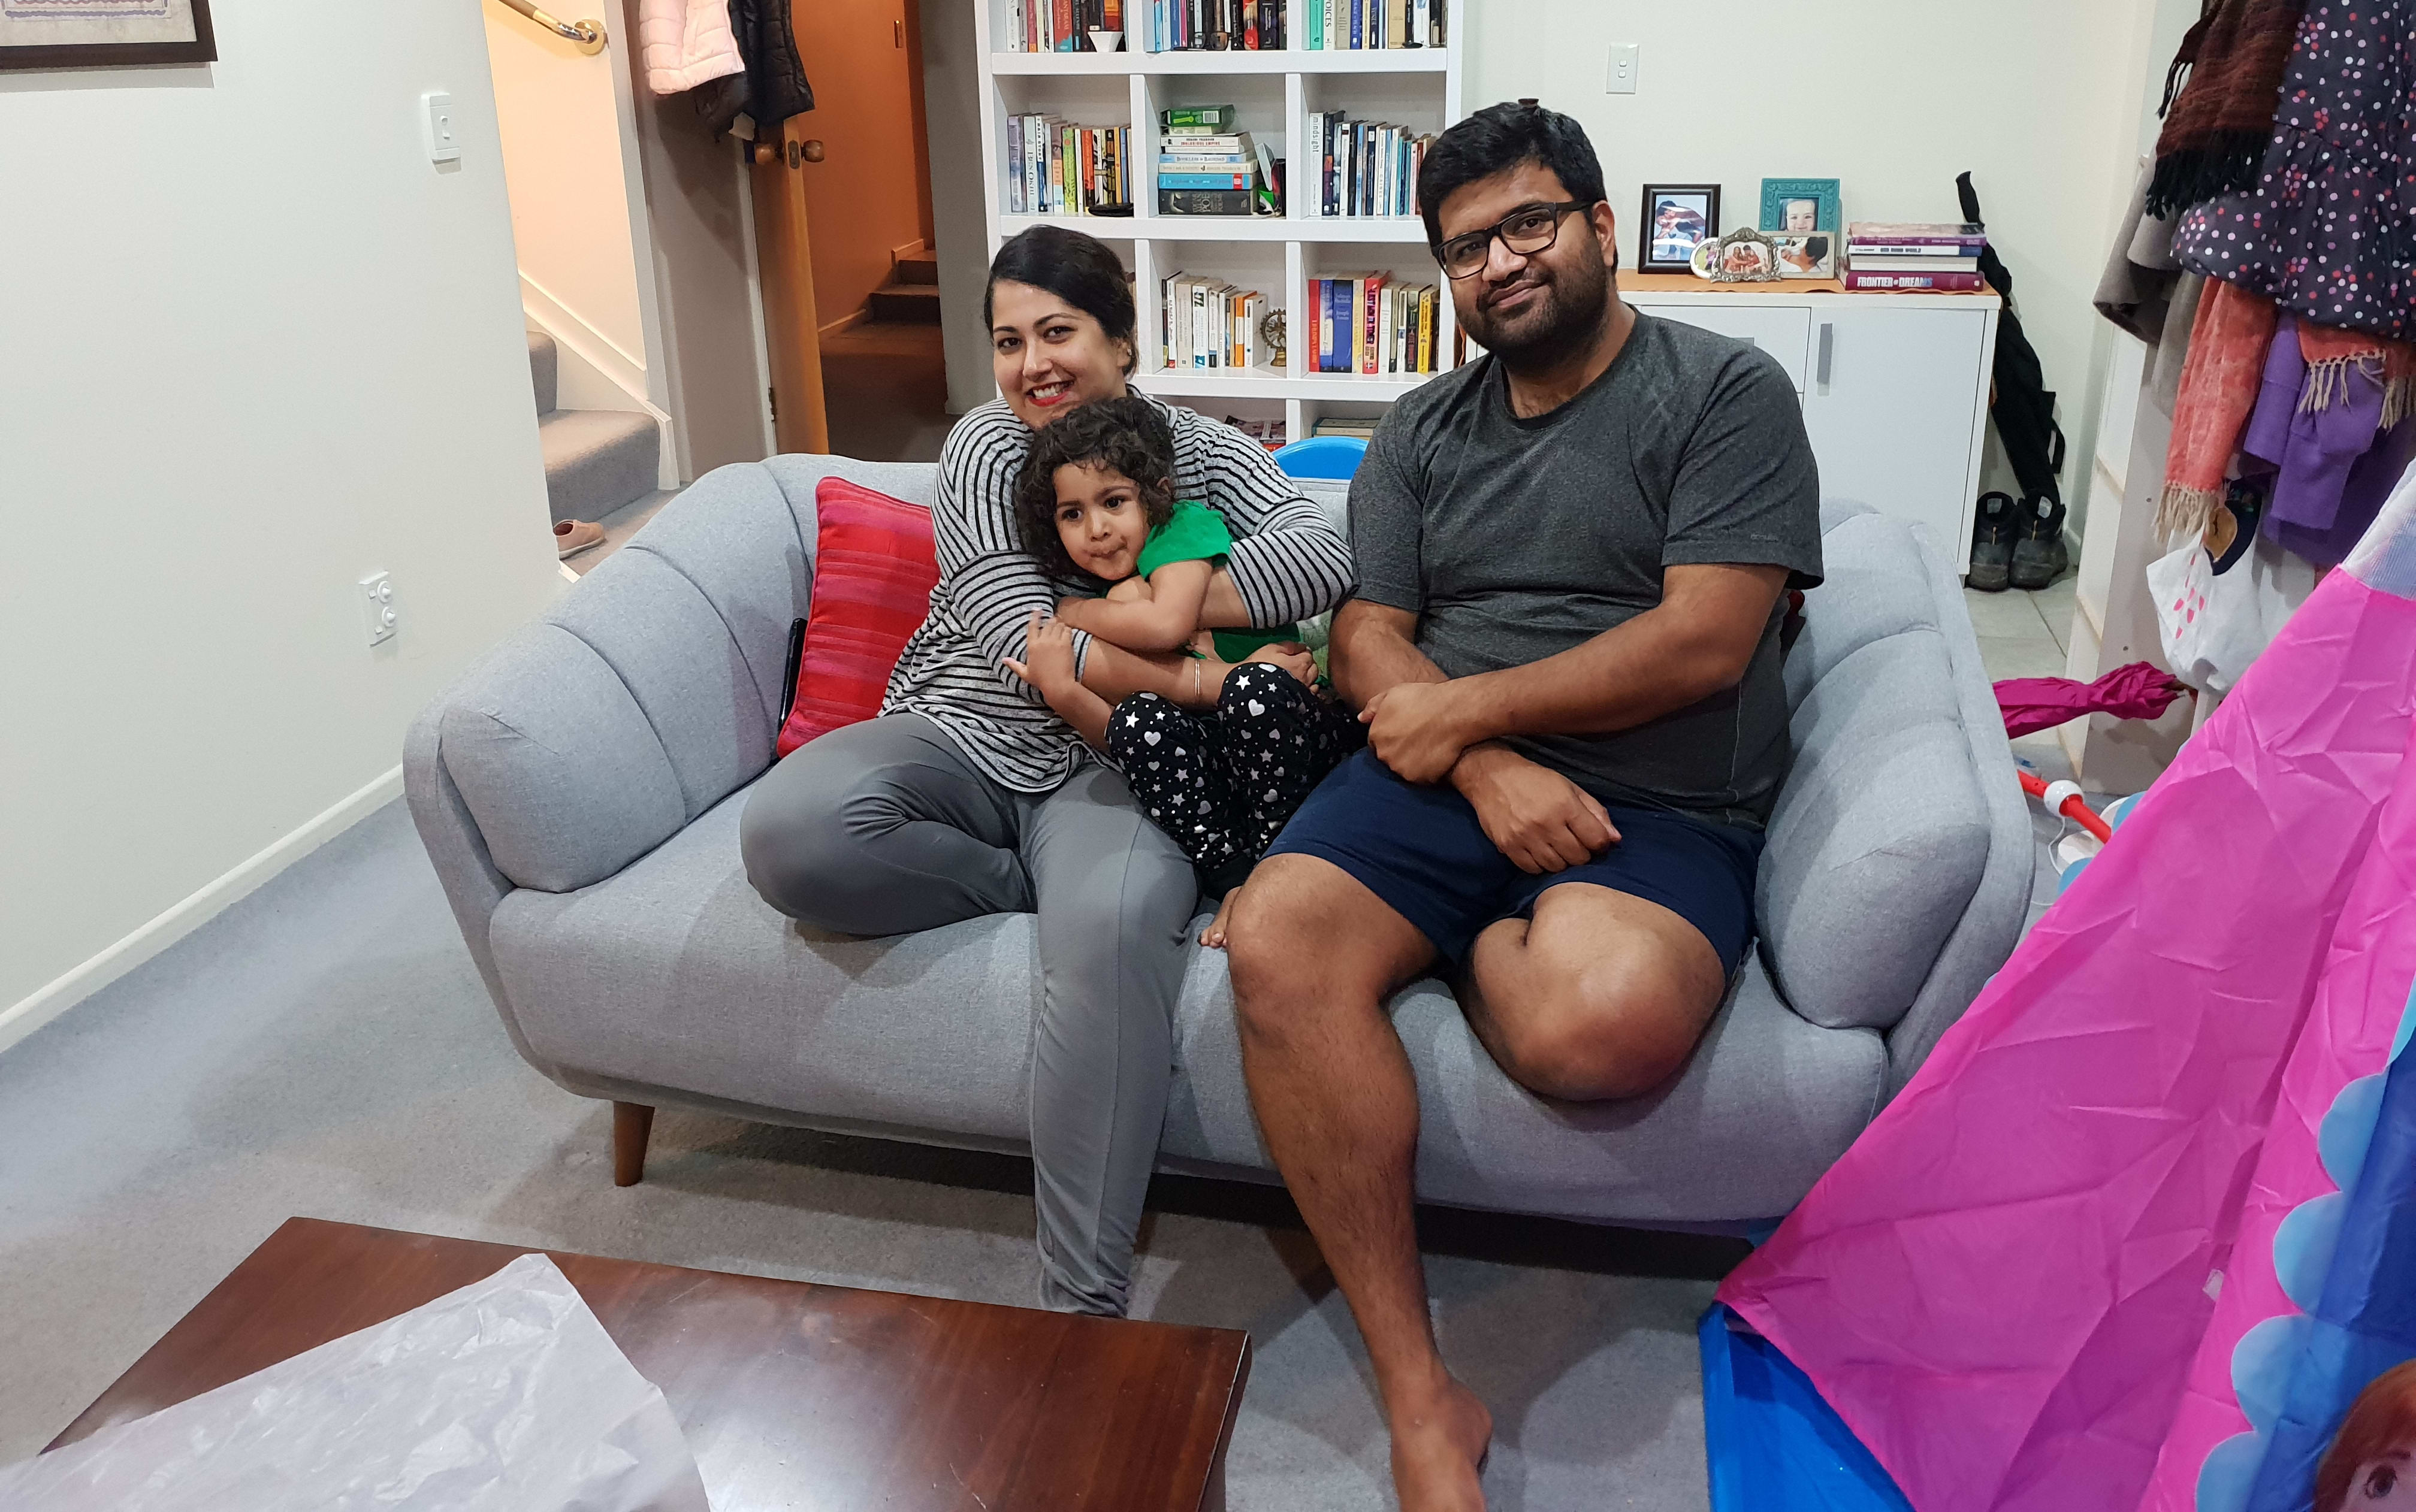 Ishita and Zorran relaxing at home on the couch with their daughter Kaya.